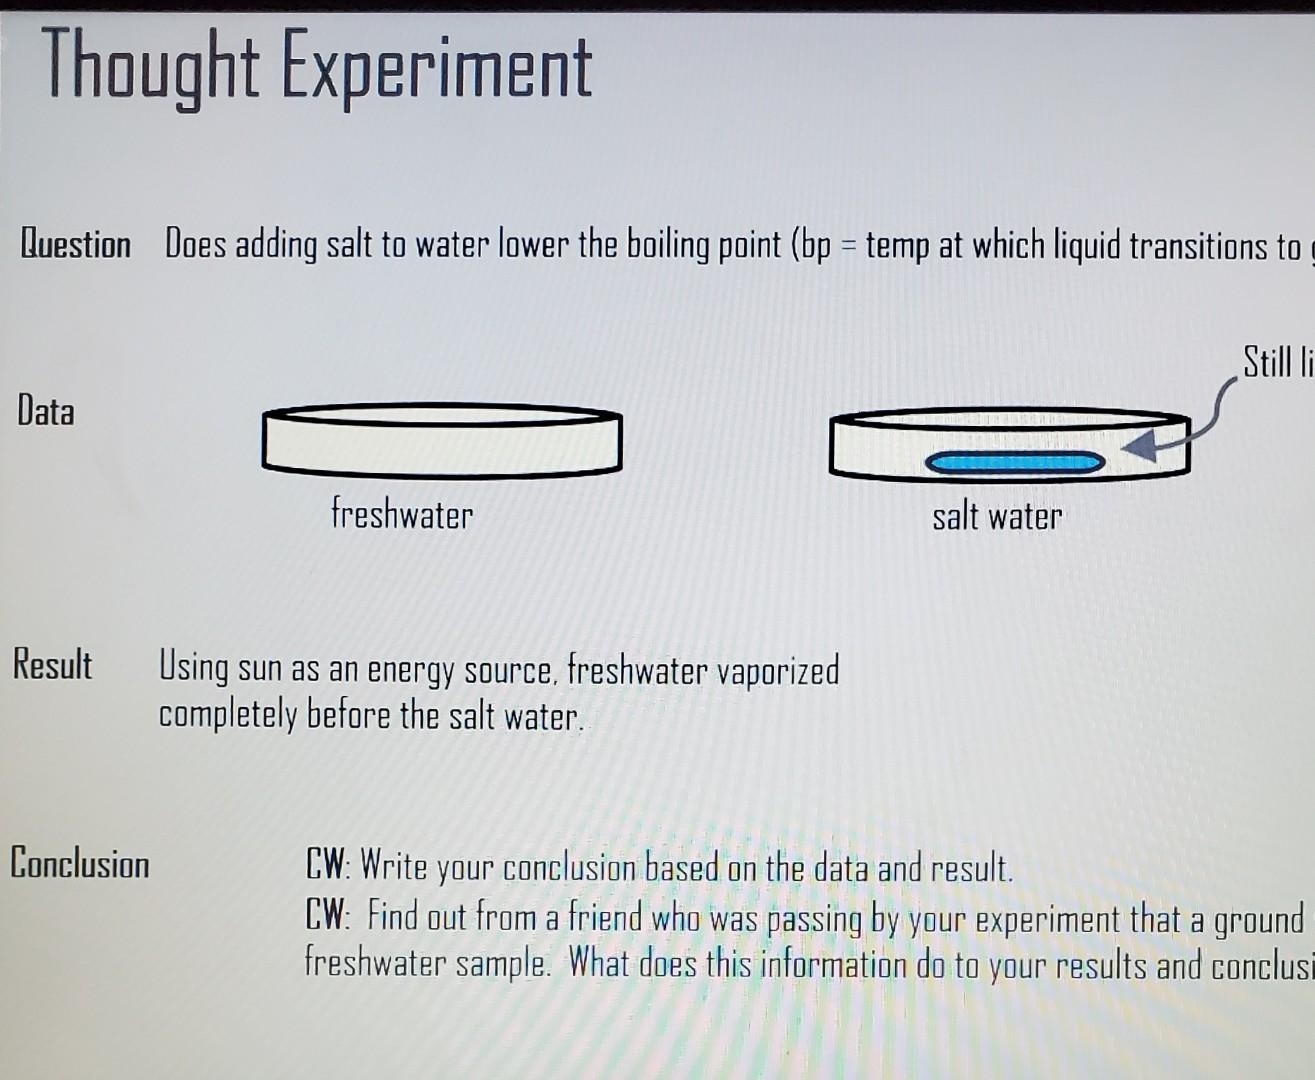 salt and water experiment